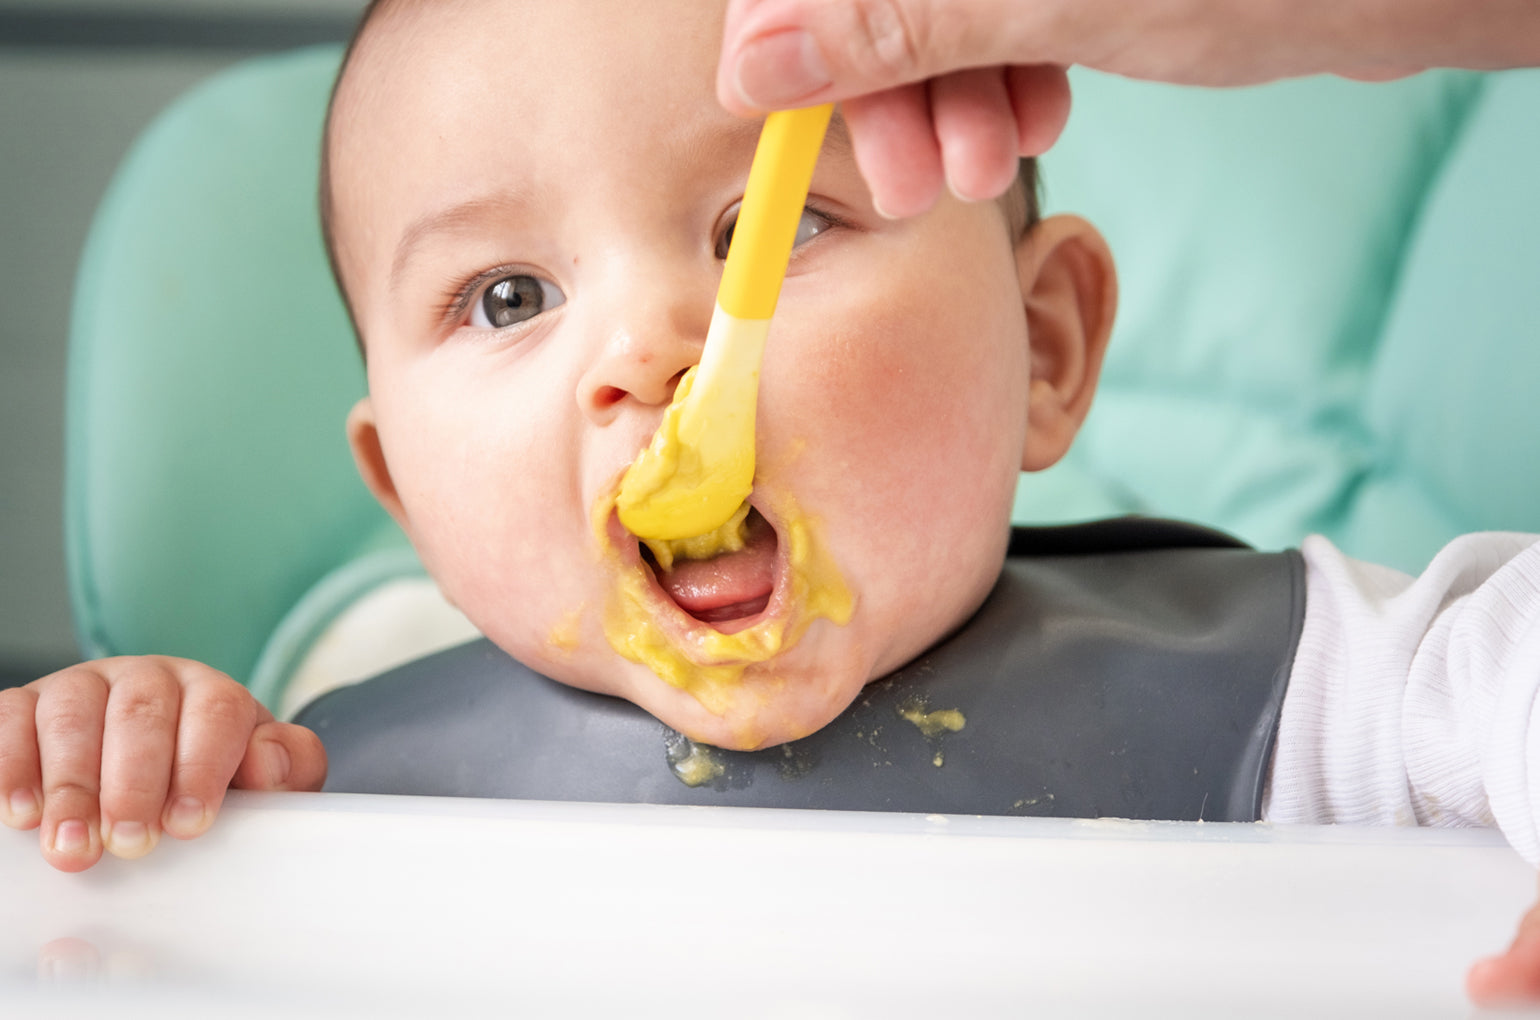 The Essentials of Complementary Feeding Practices for Babies